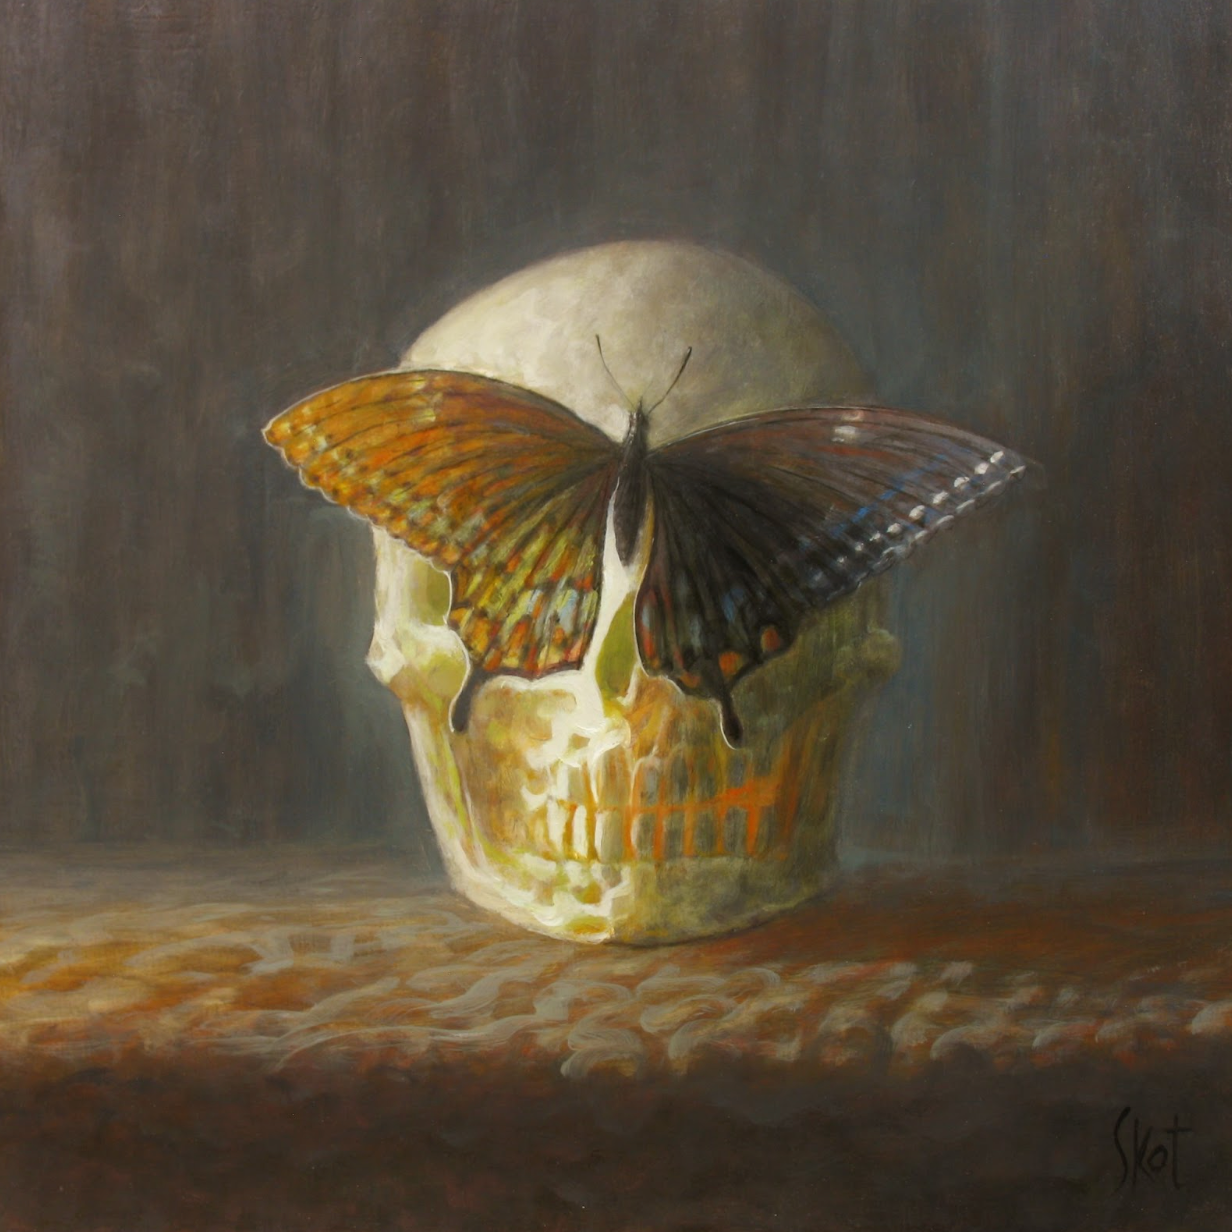 Masquerade Series  Black Swallowtail Butterfly and Skull by Skot Art